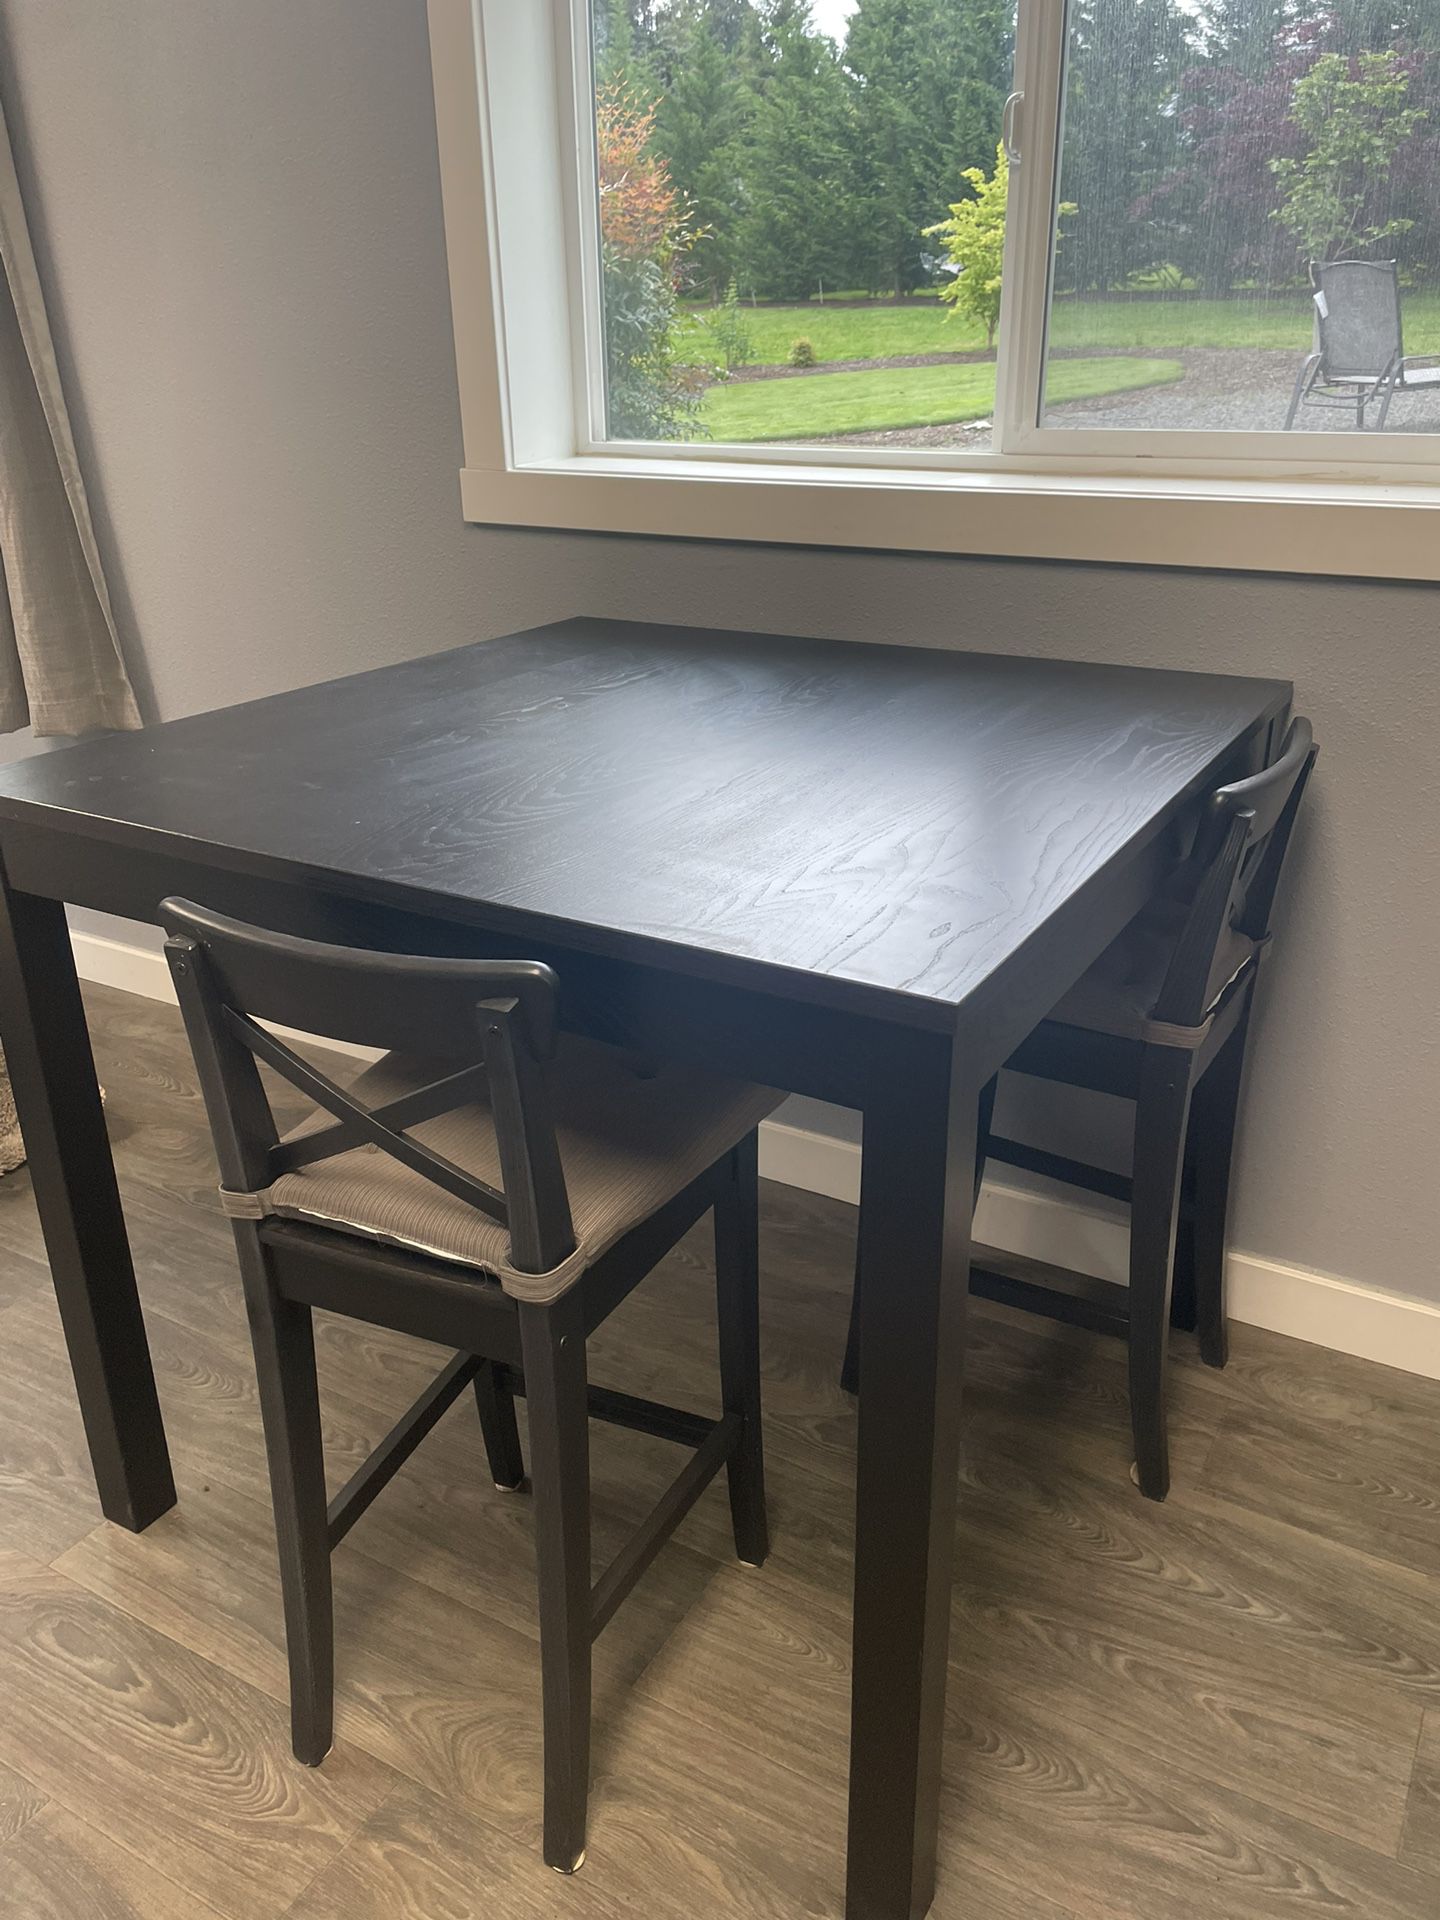 Ikea Dining Table With Four Chairs